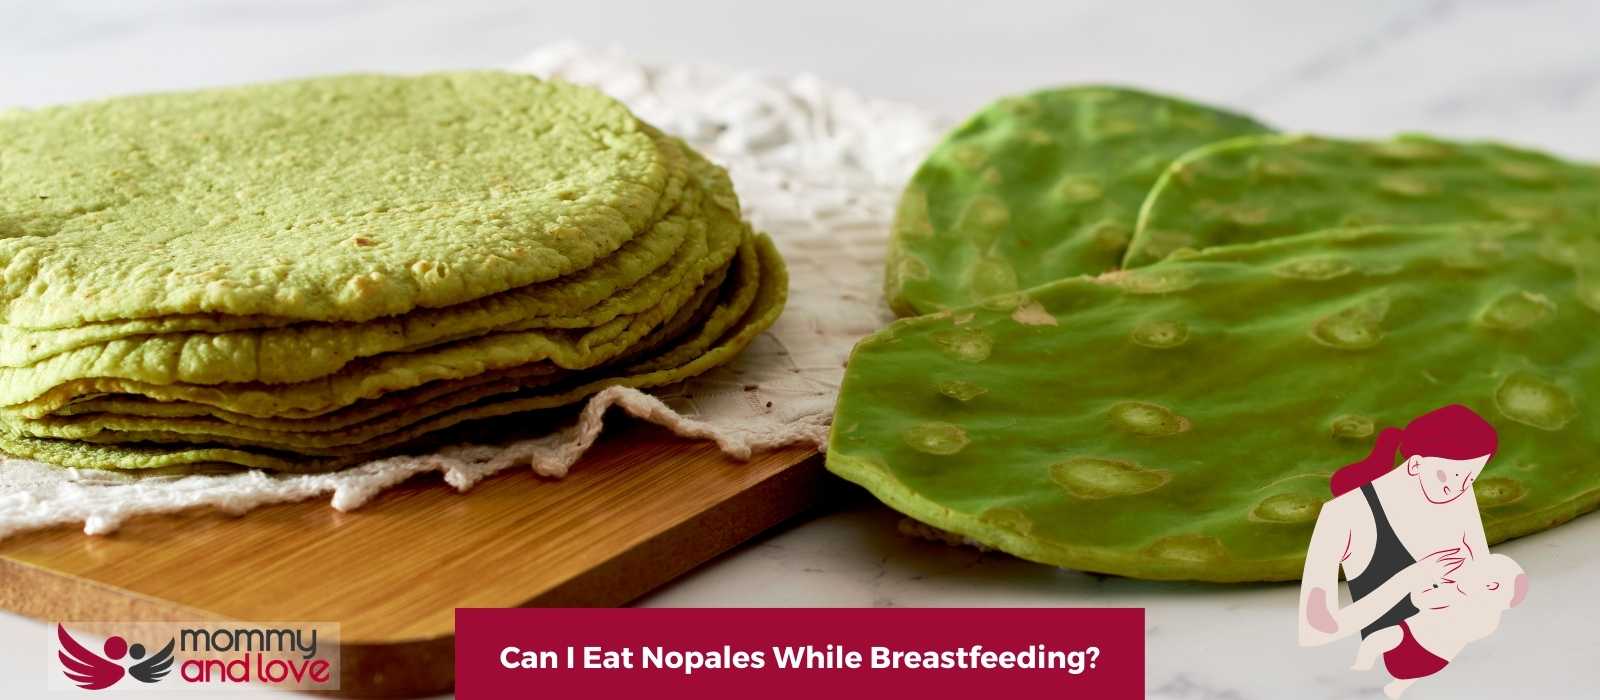 Can I Eat Nopales While Breastfeeding?